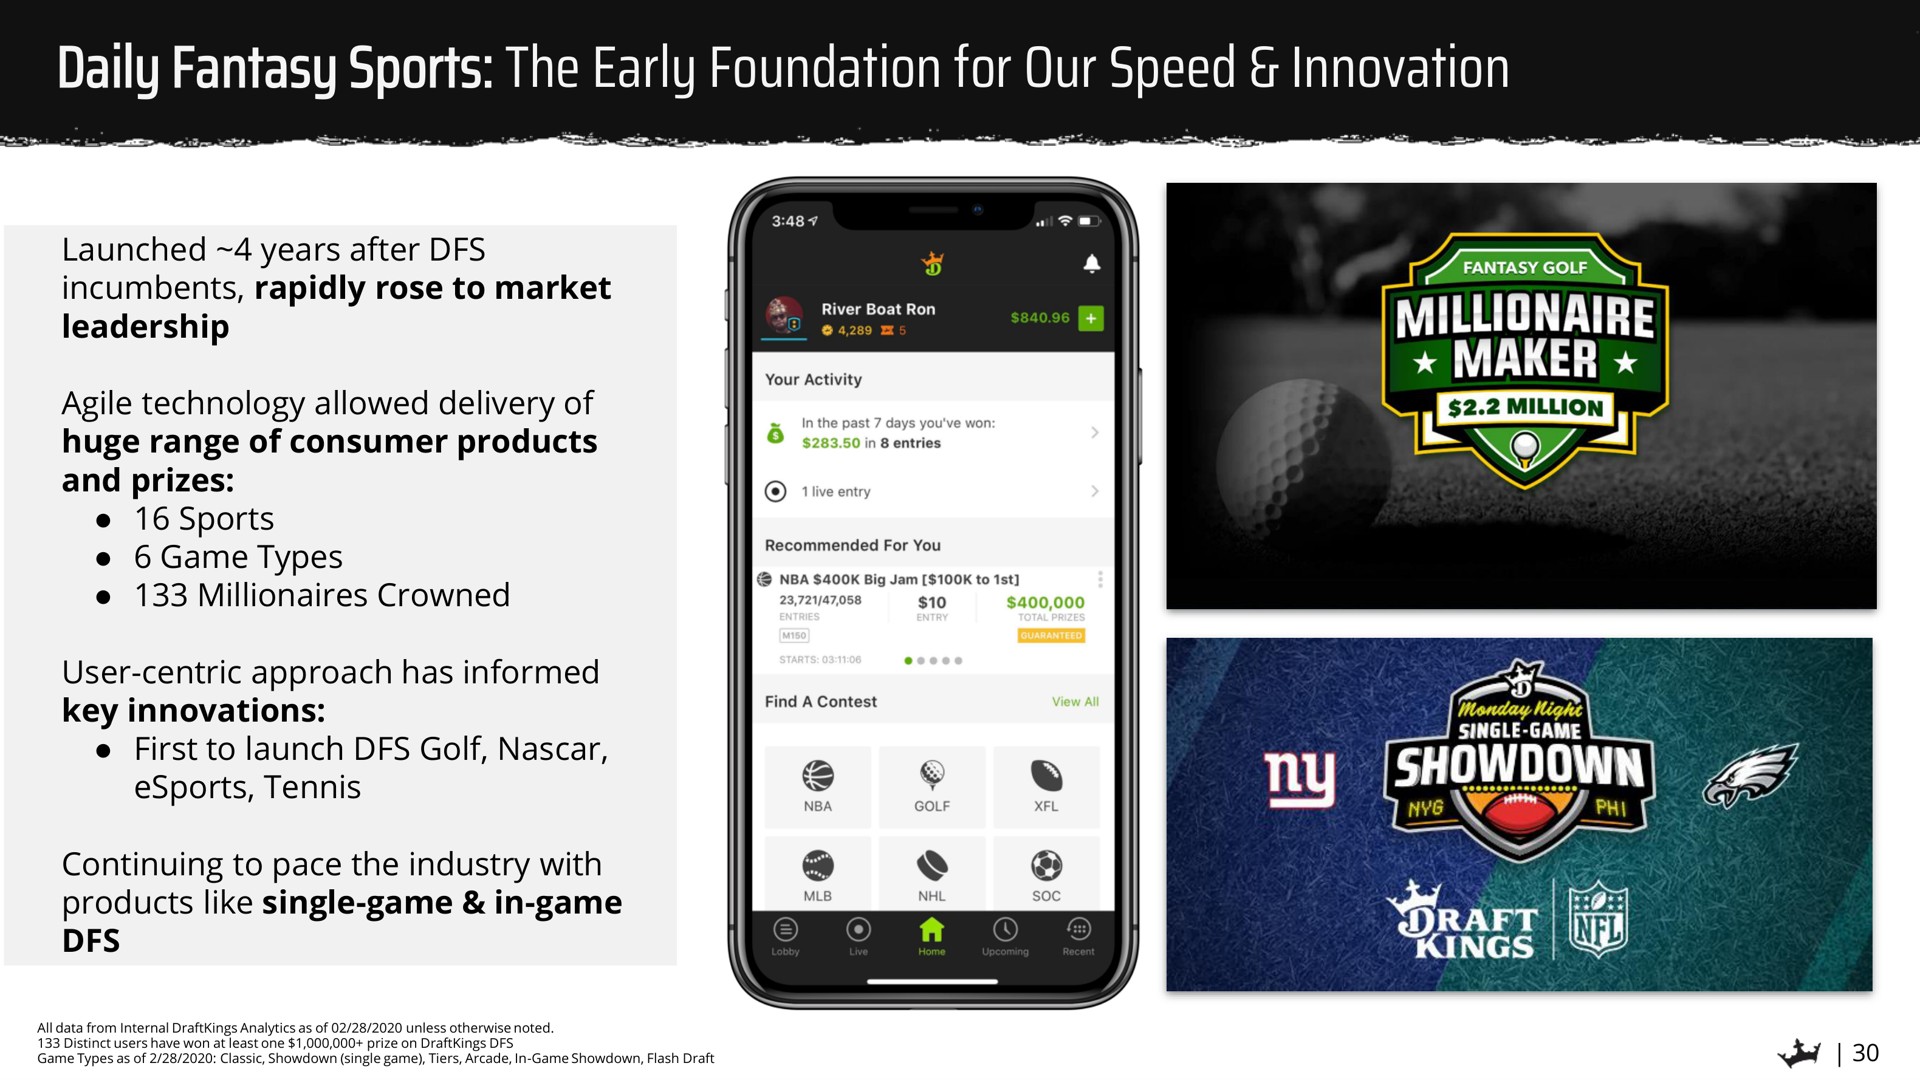 daily fantasy sports the early foundation for our speed innovation | DraftKings